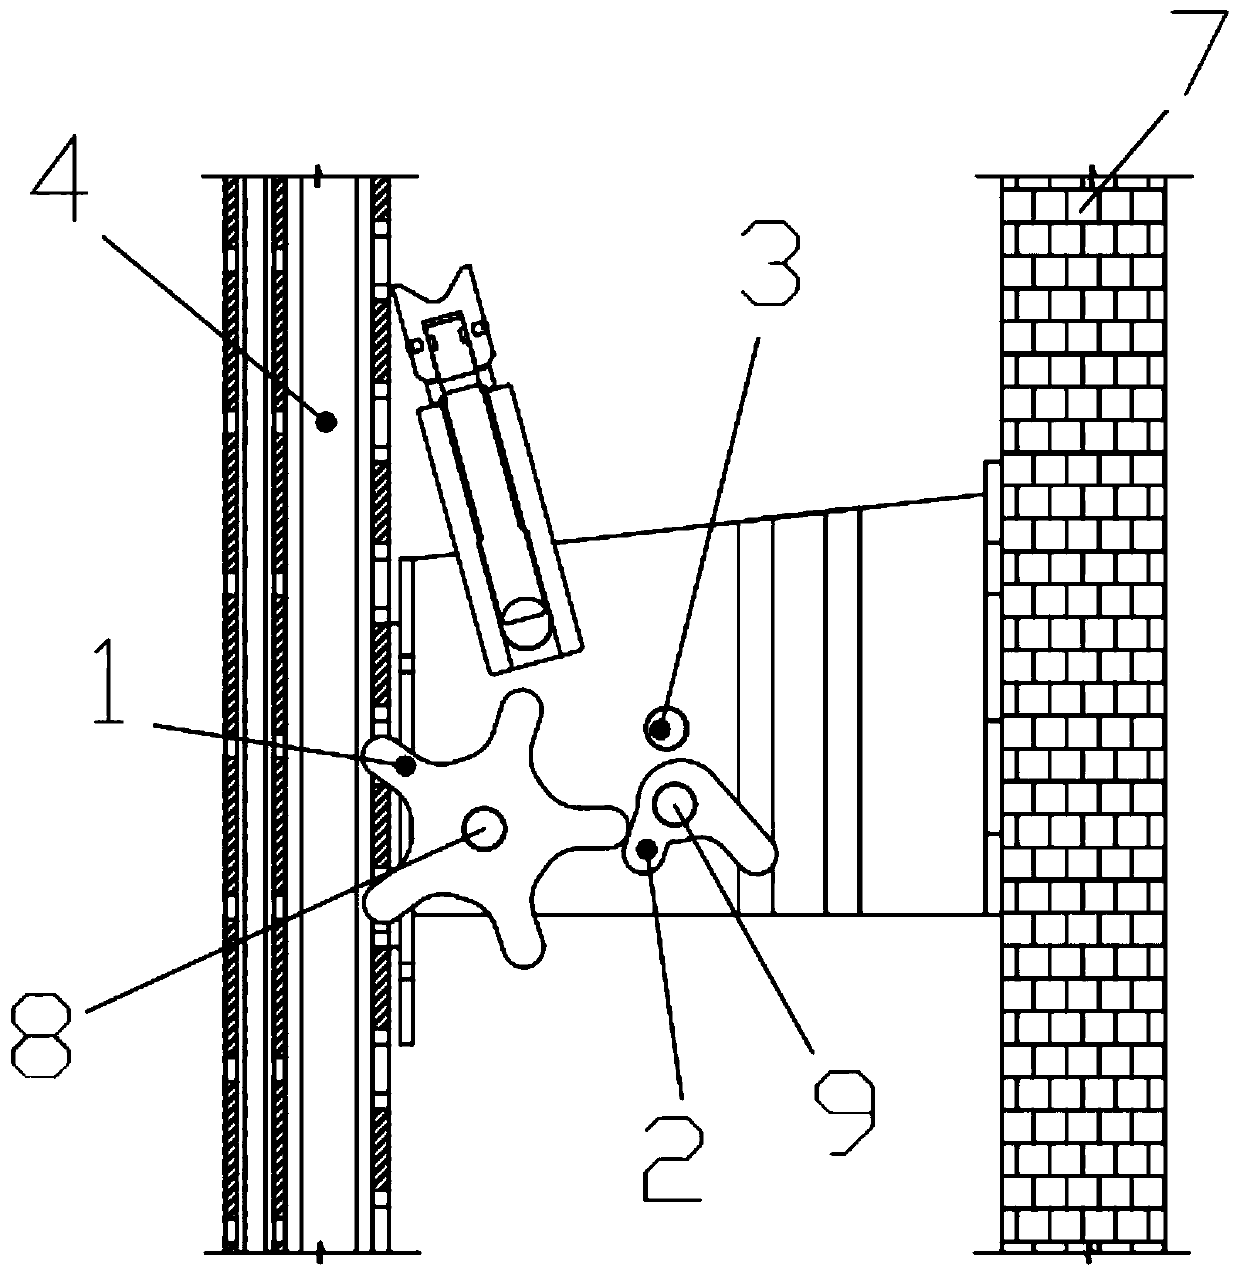 Over-speed stop mechanism and lifting scaffold